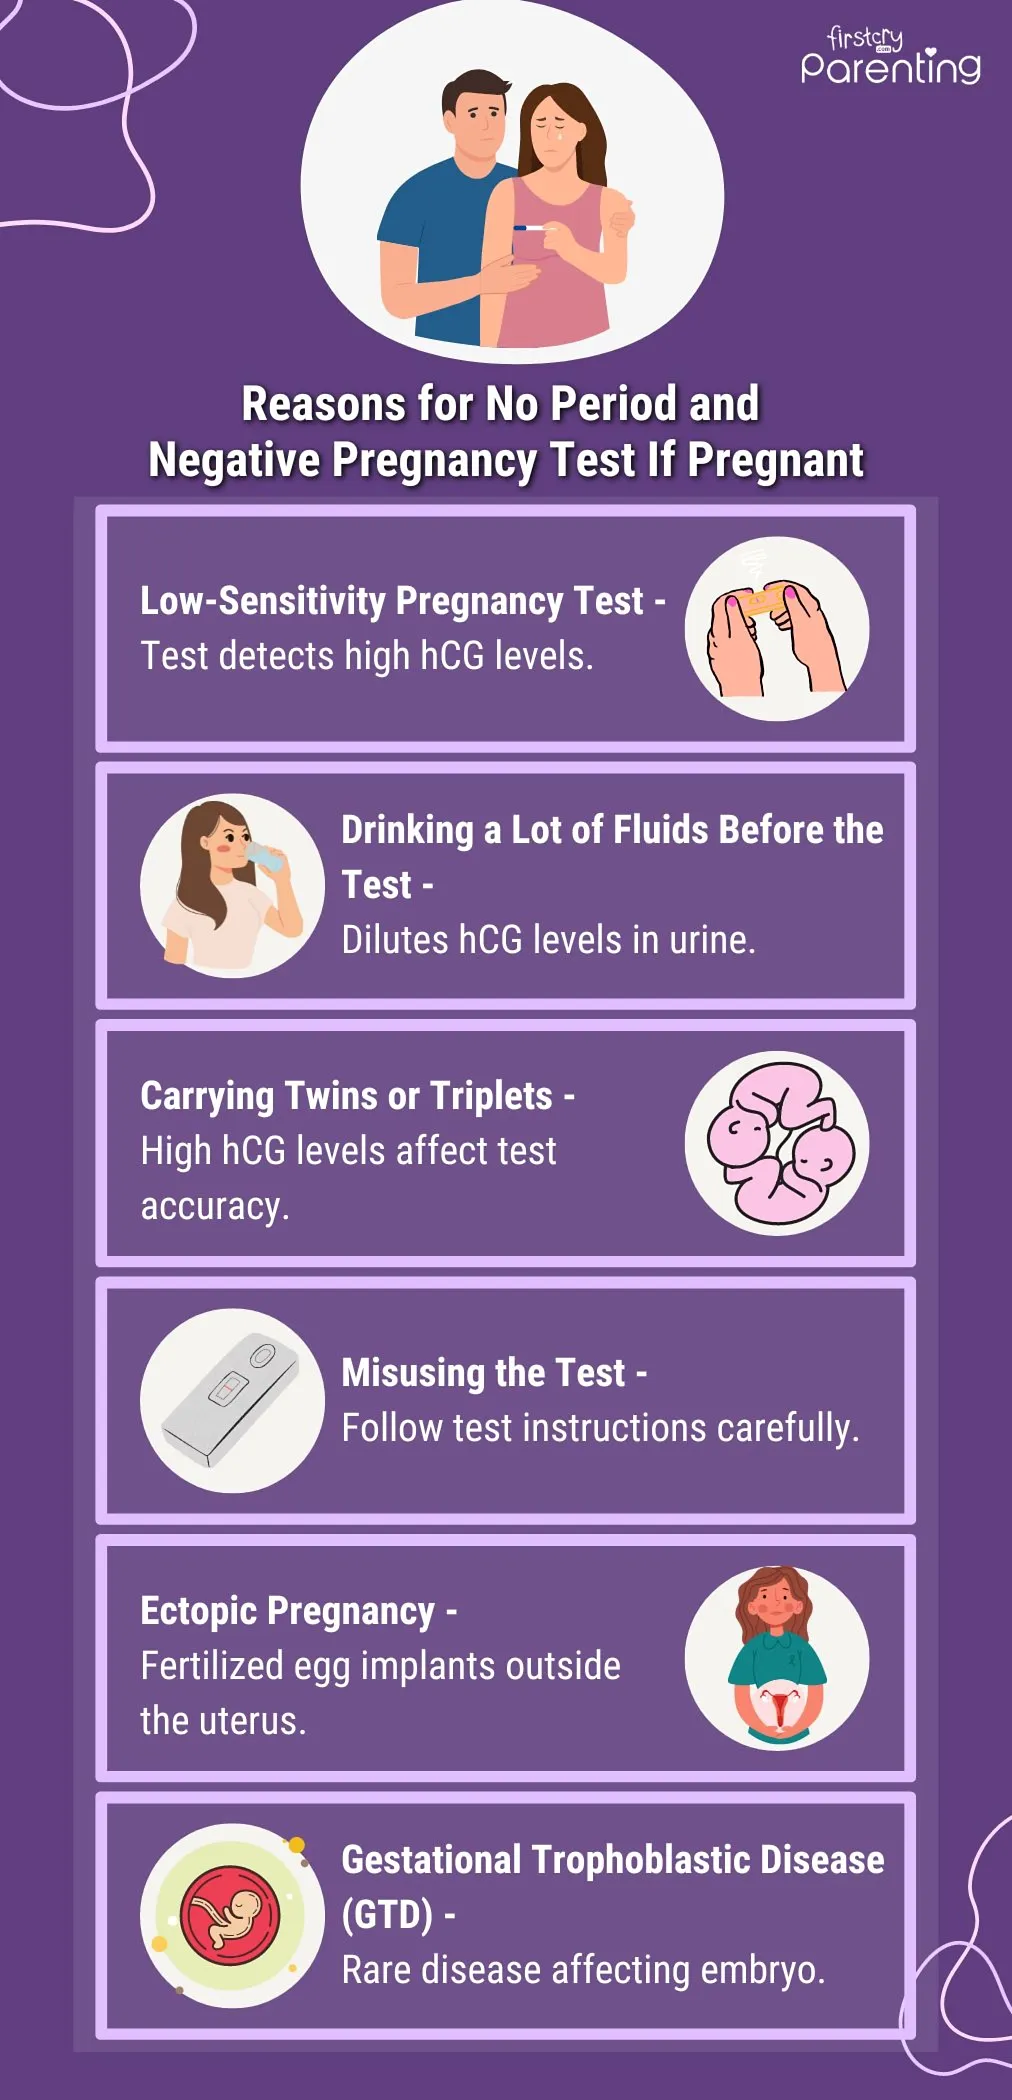 Reasons for No Period and Negative Pregnancy Test If Pregnant - Infographic